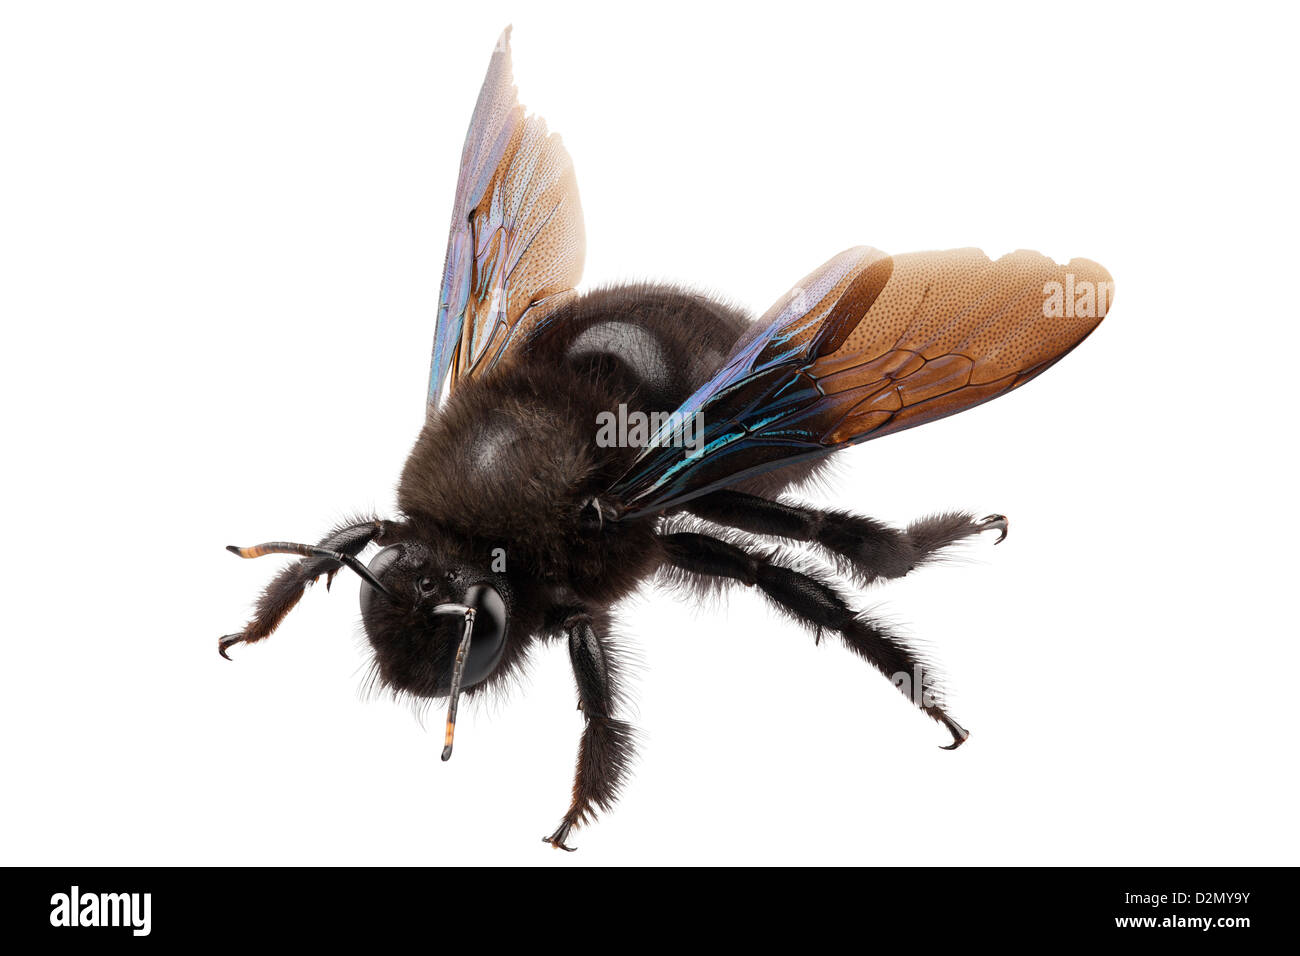 violet carpenter bee species xylocopa violacea in high definition with extreme focus and DOF (depth of field) isolated on white Stock Photo